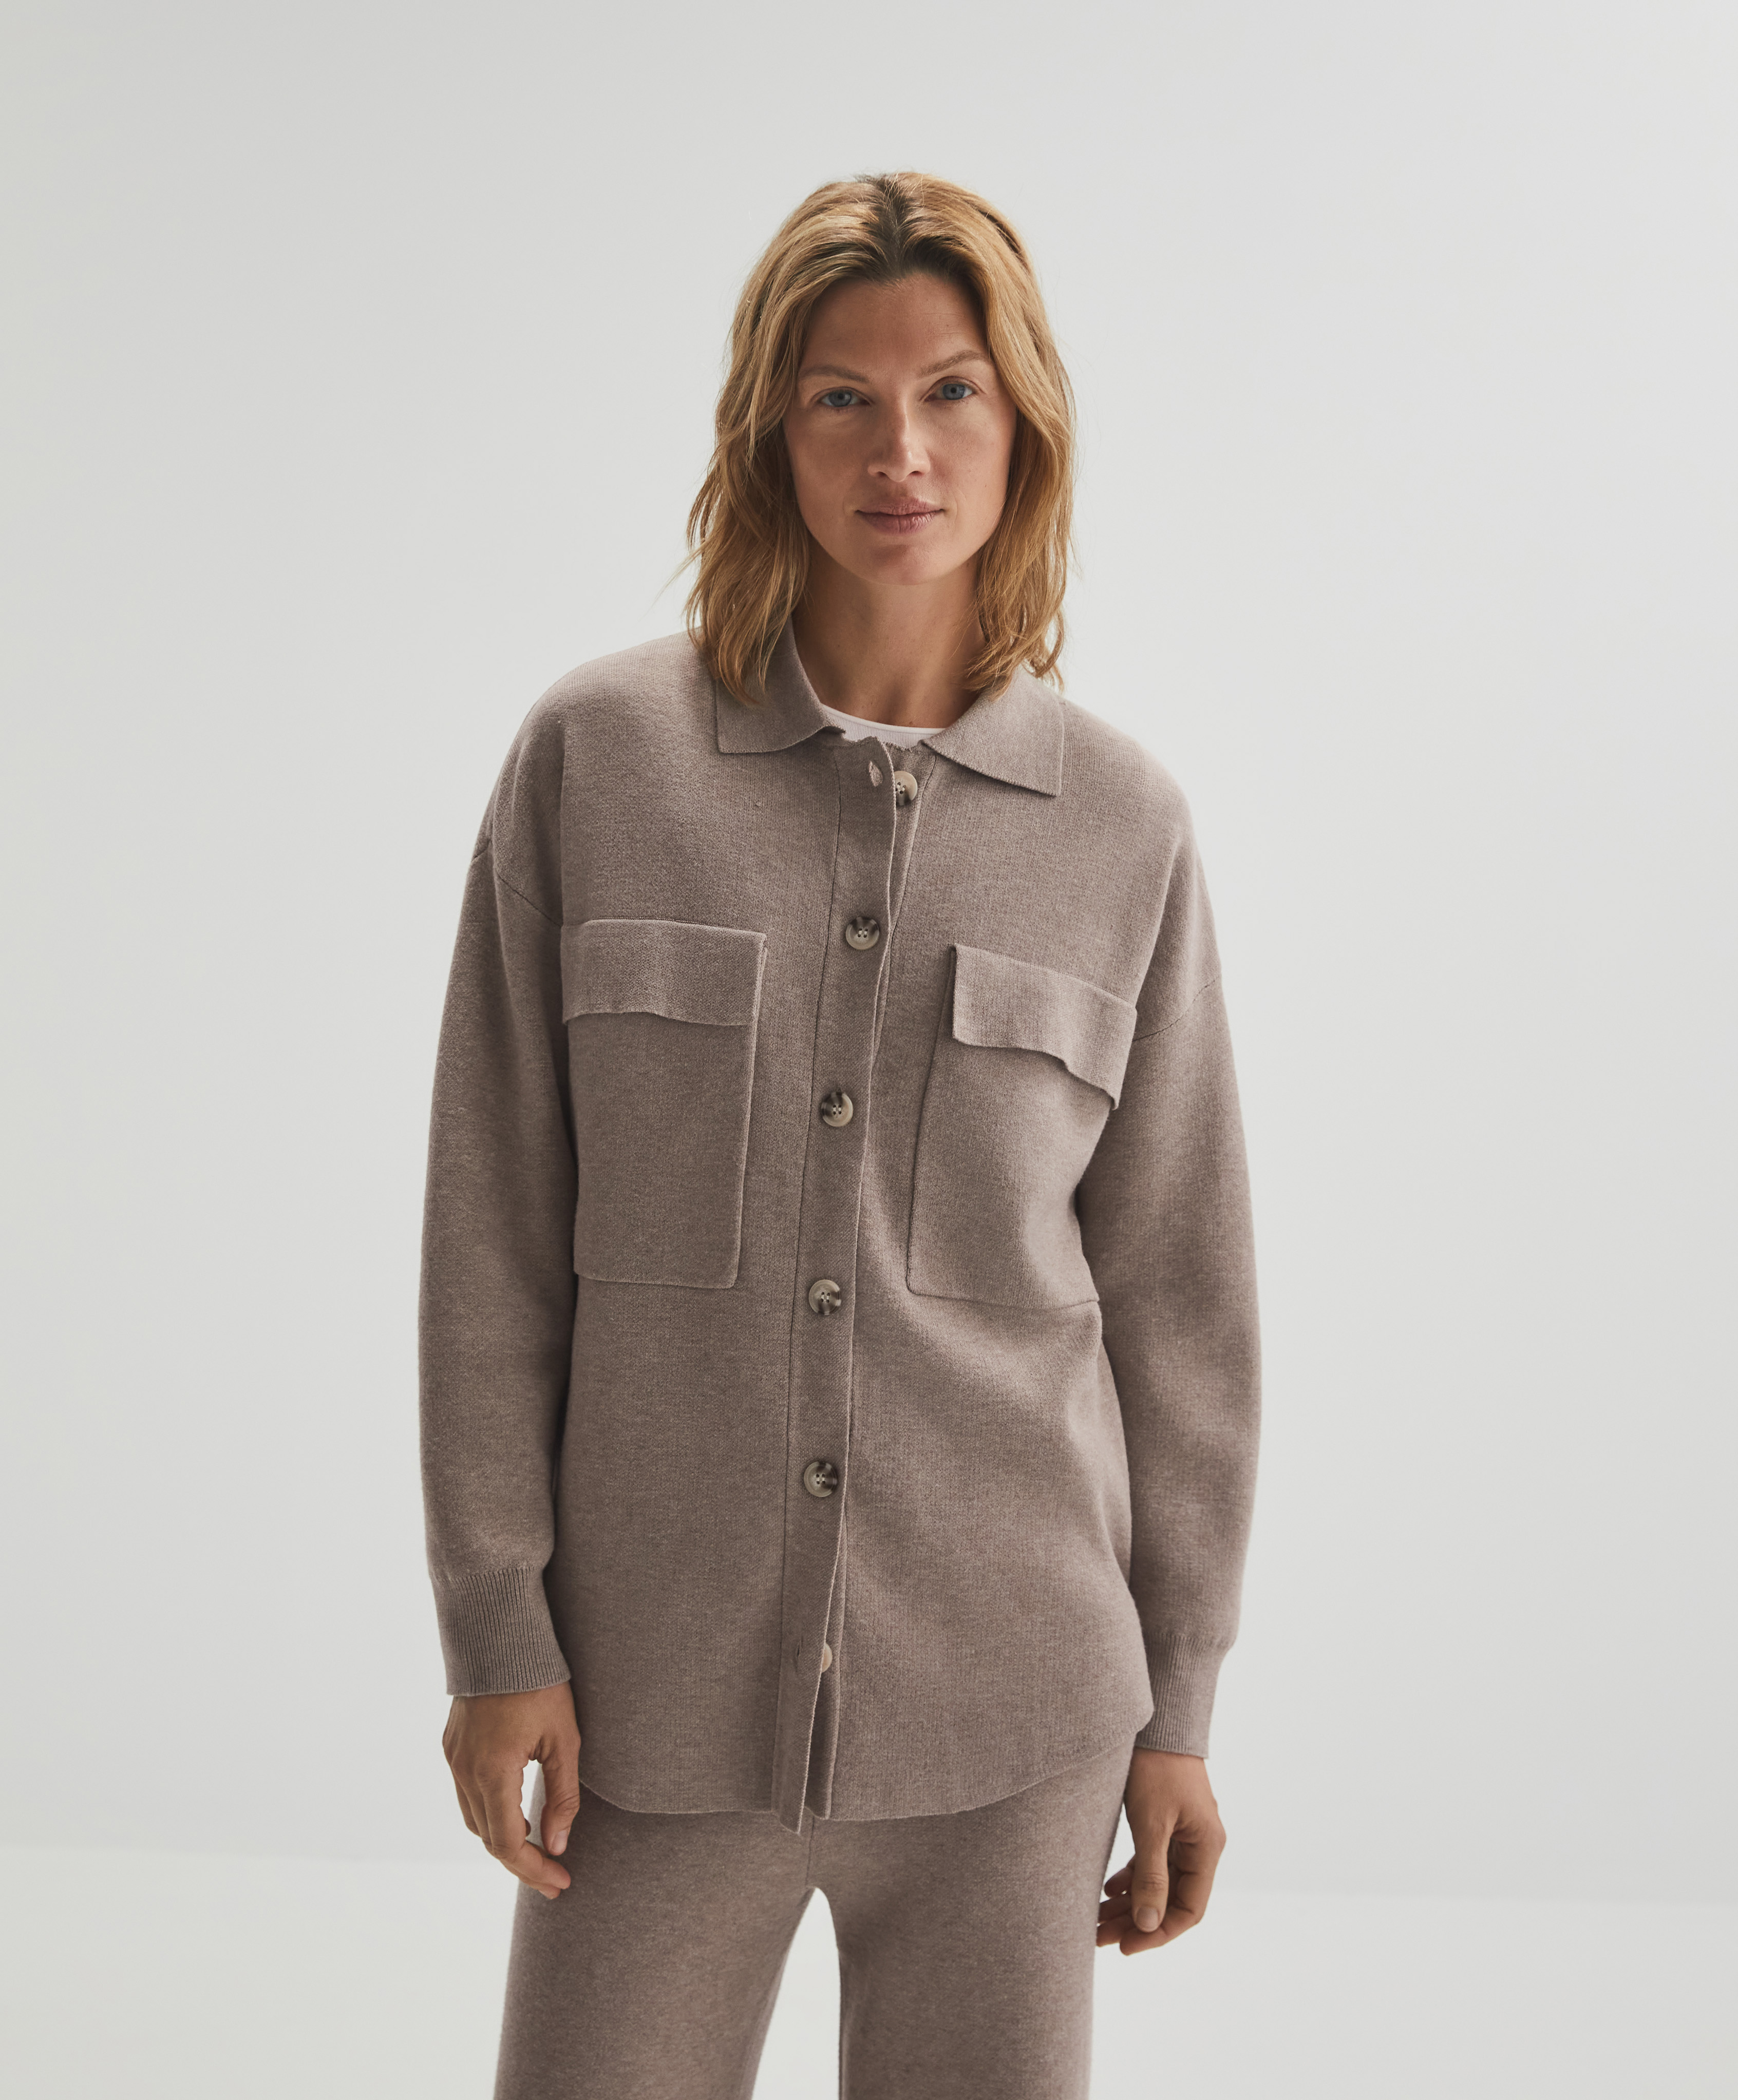 Knit overshirt with pockets